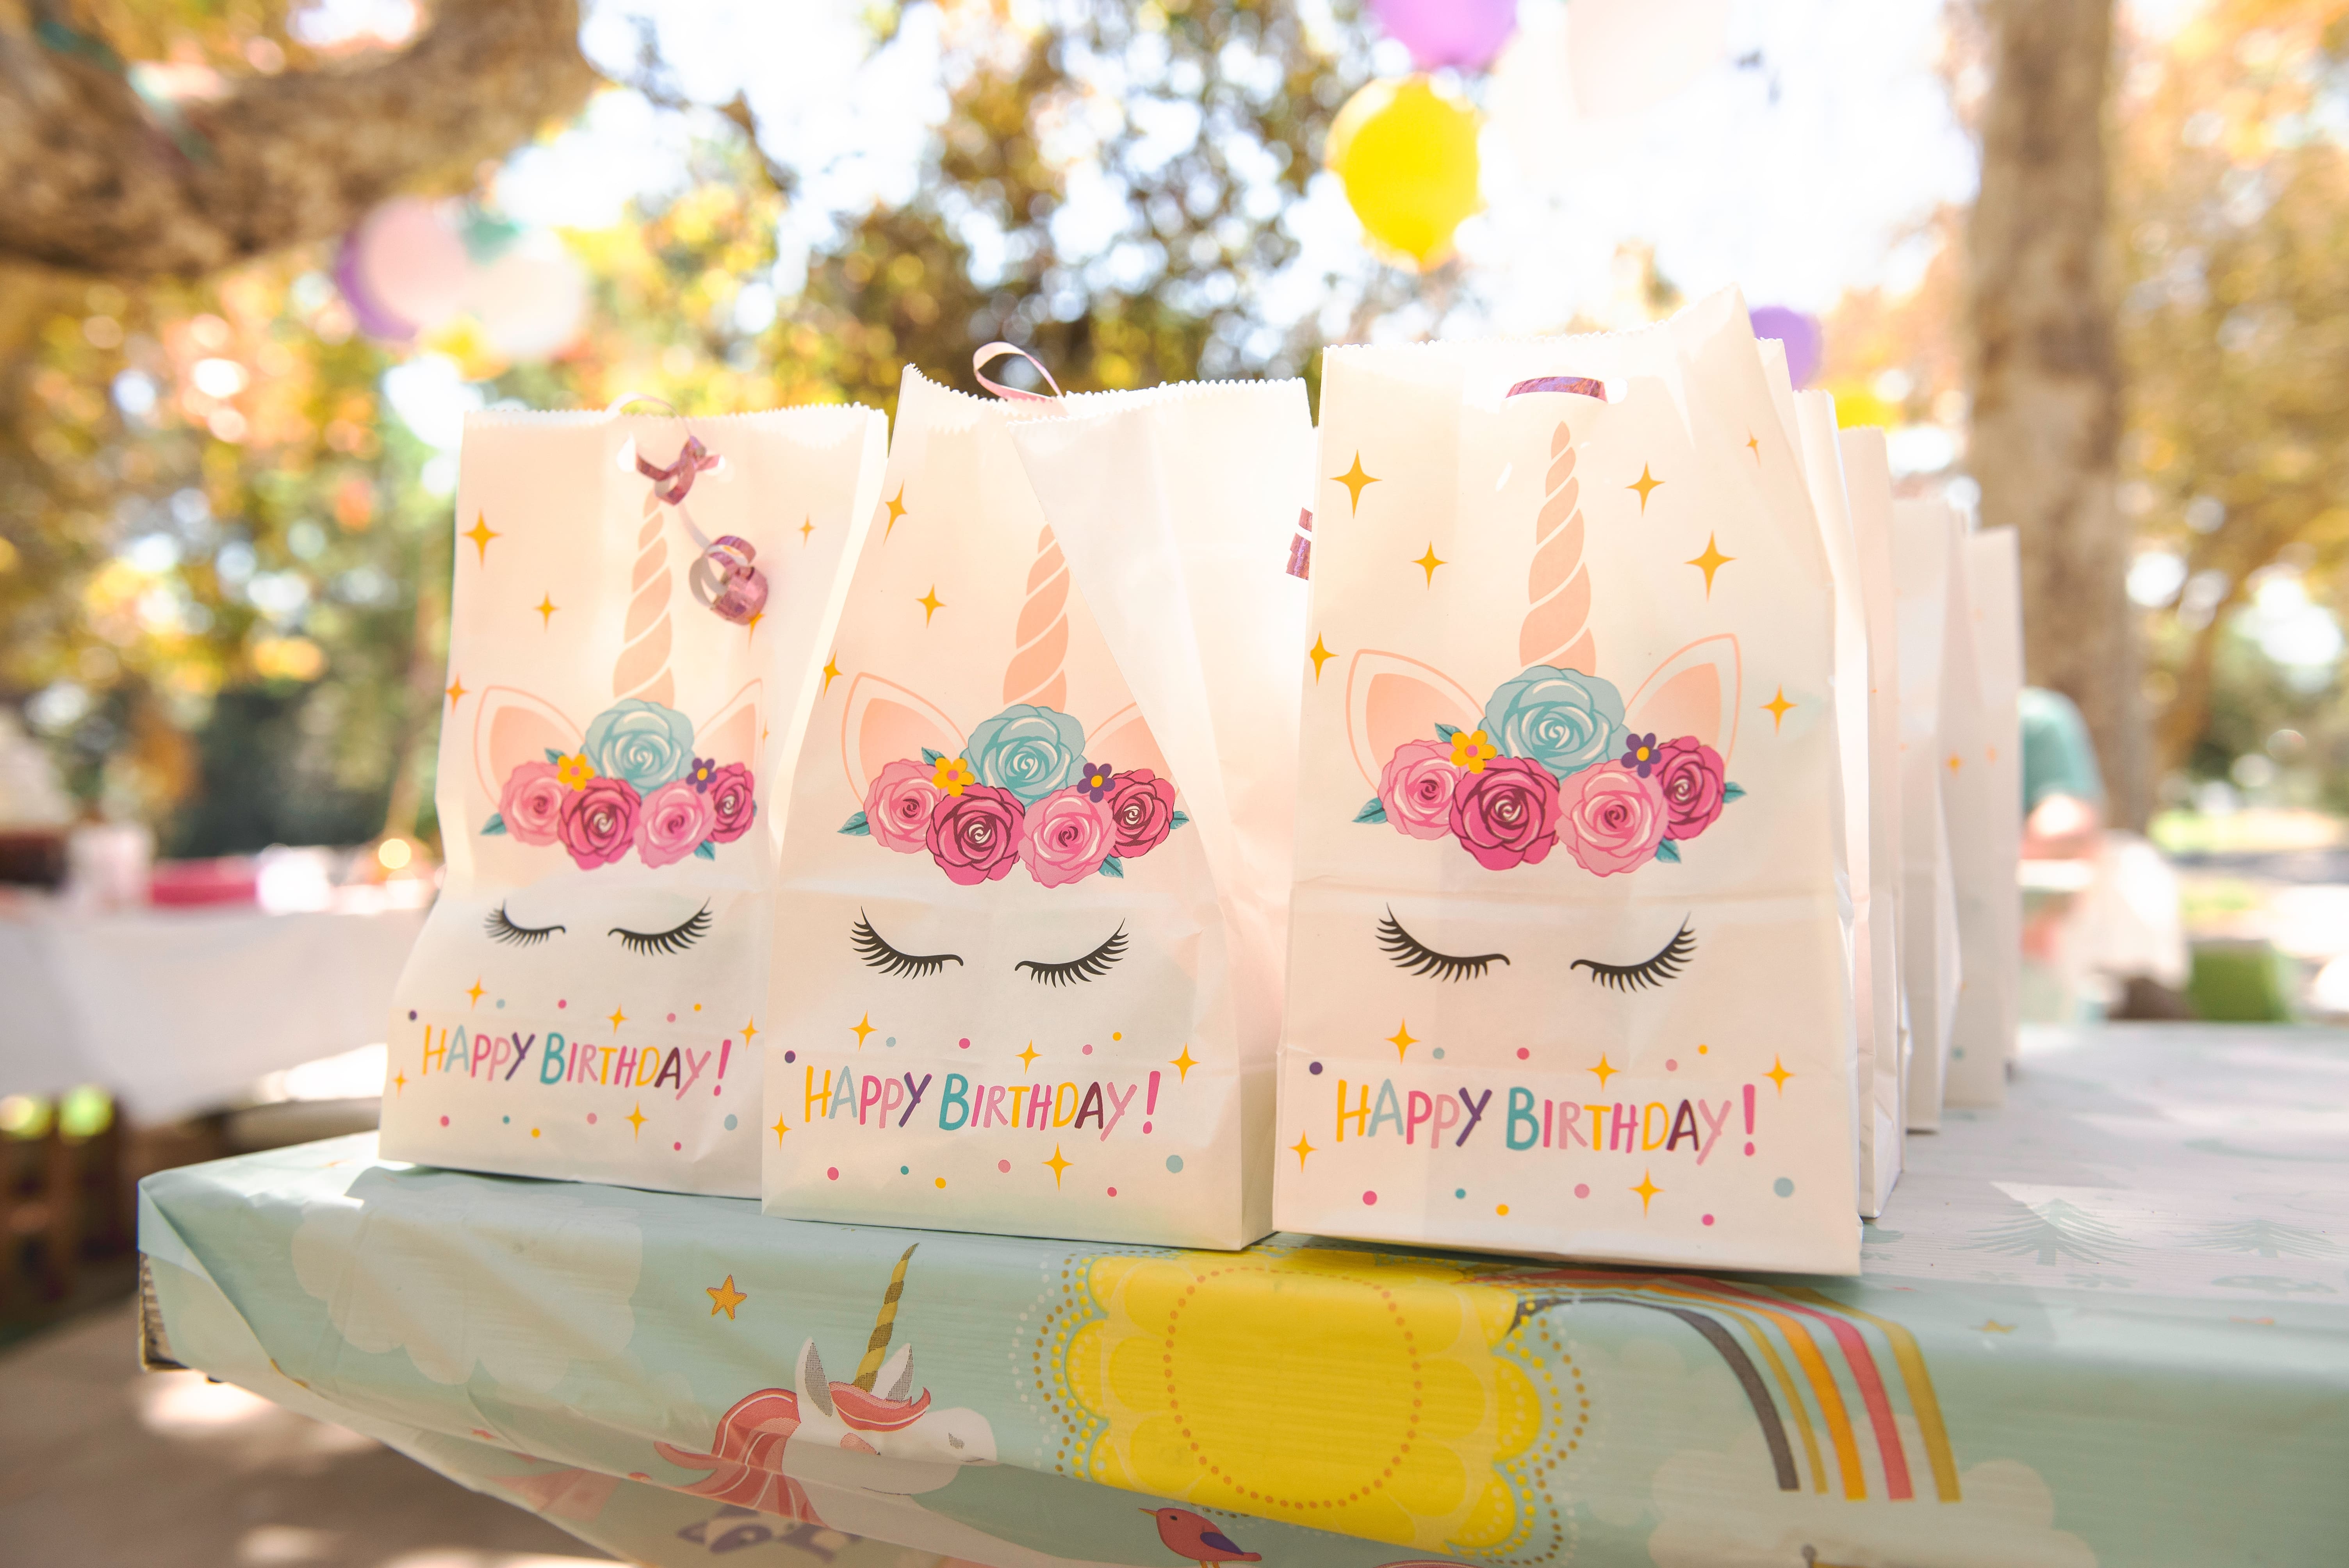 3 Birthday Gift Bags on a birthday-themed table, outdoors